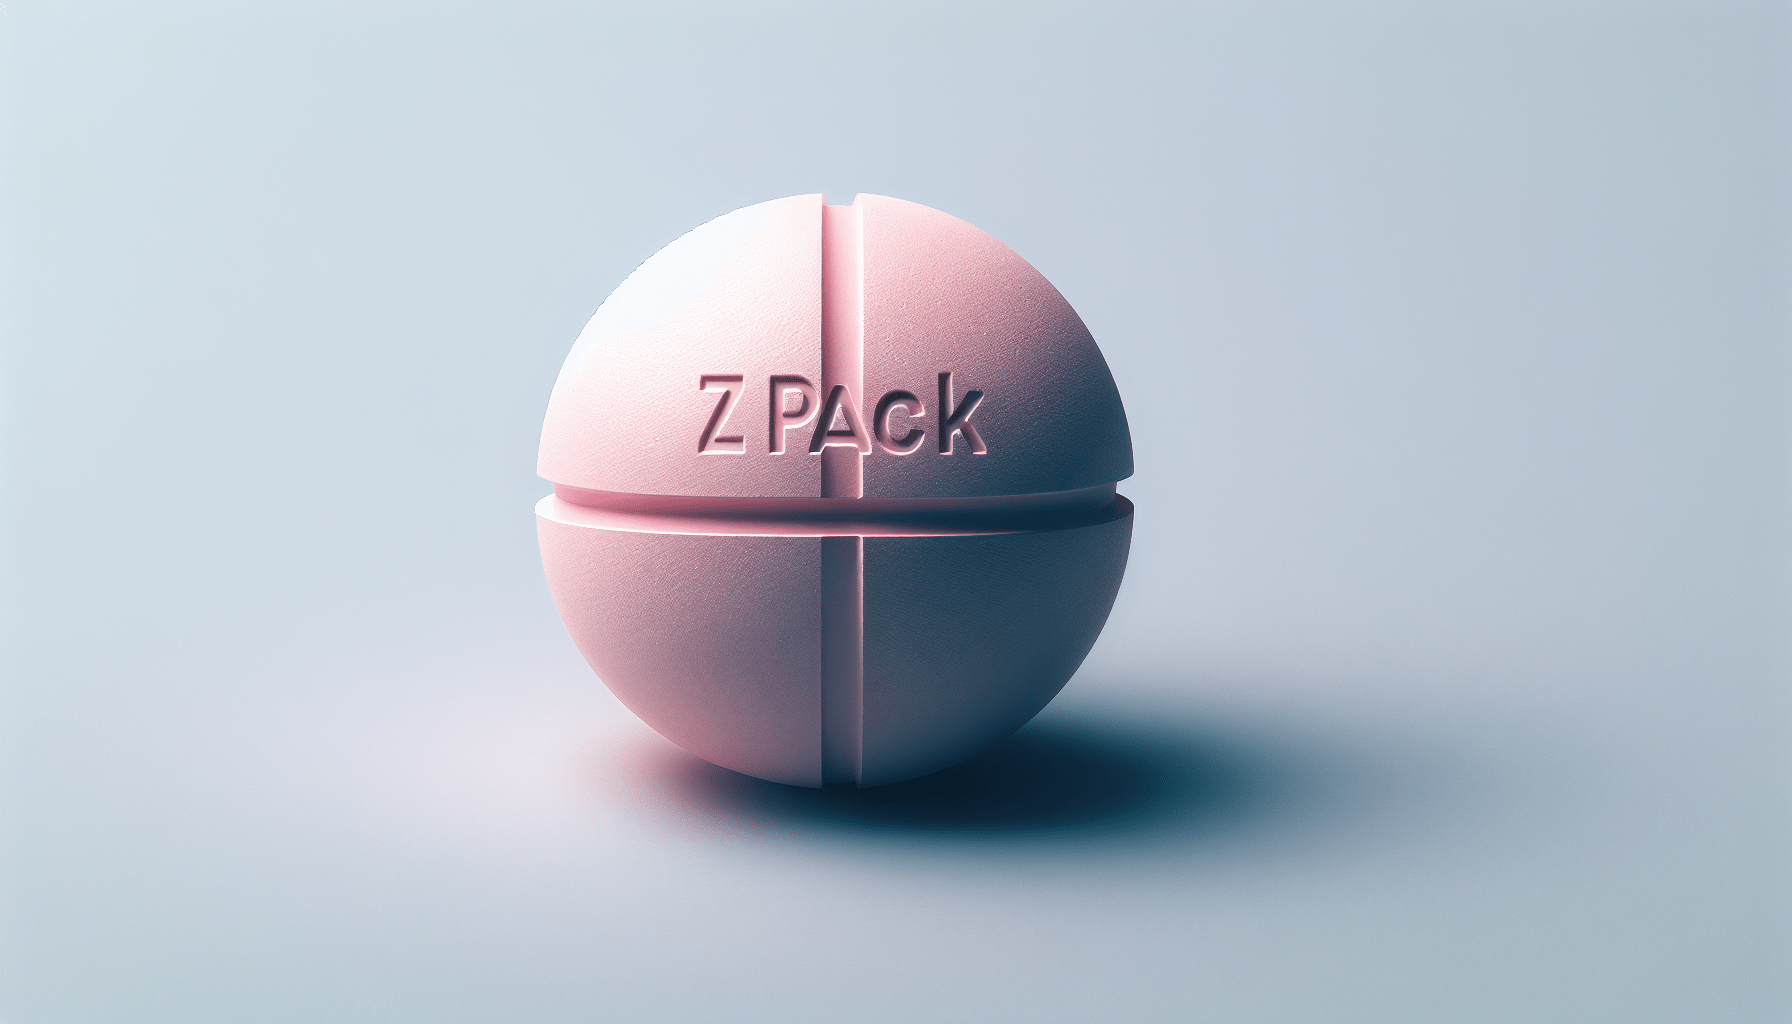 What STD Is Zpack Used For?